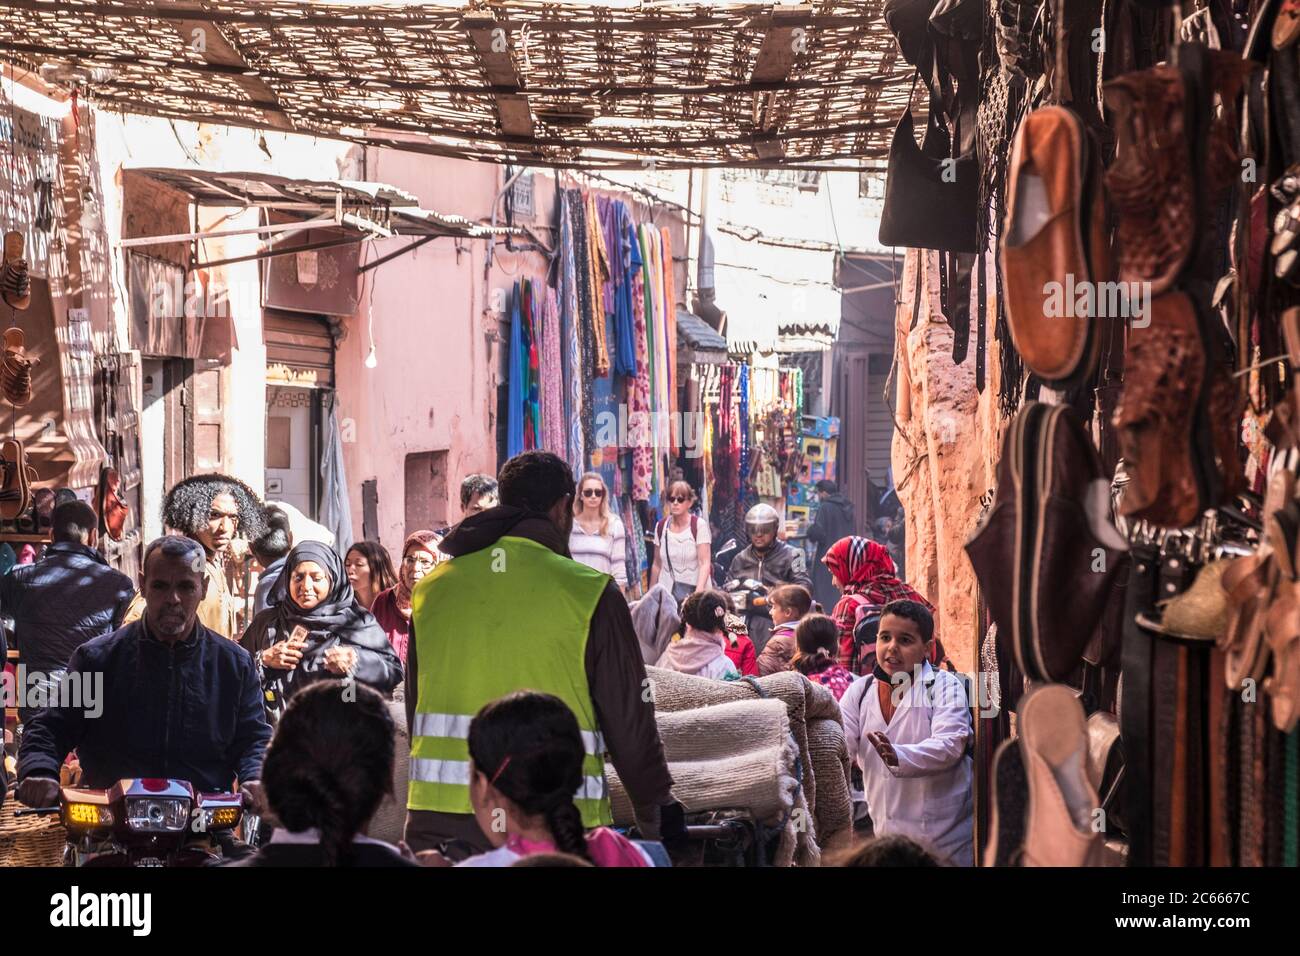 Narrow alley with shops in Souk in Marrakech, Morocco Stock Photo